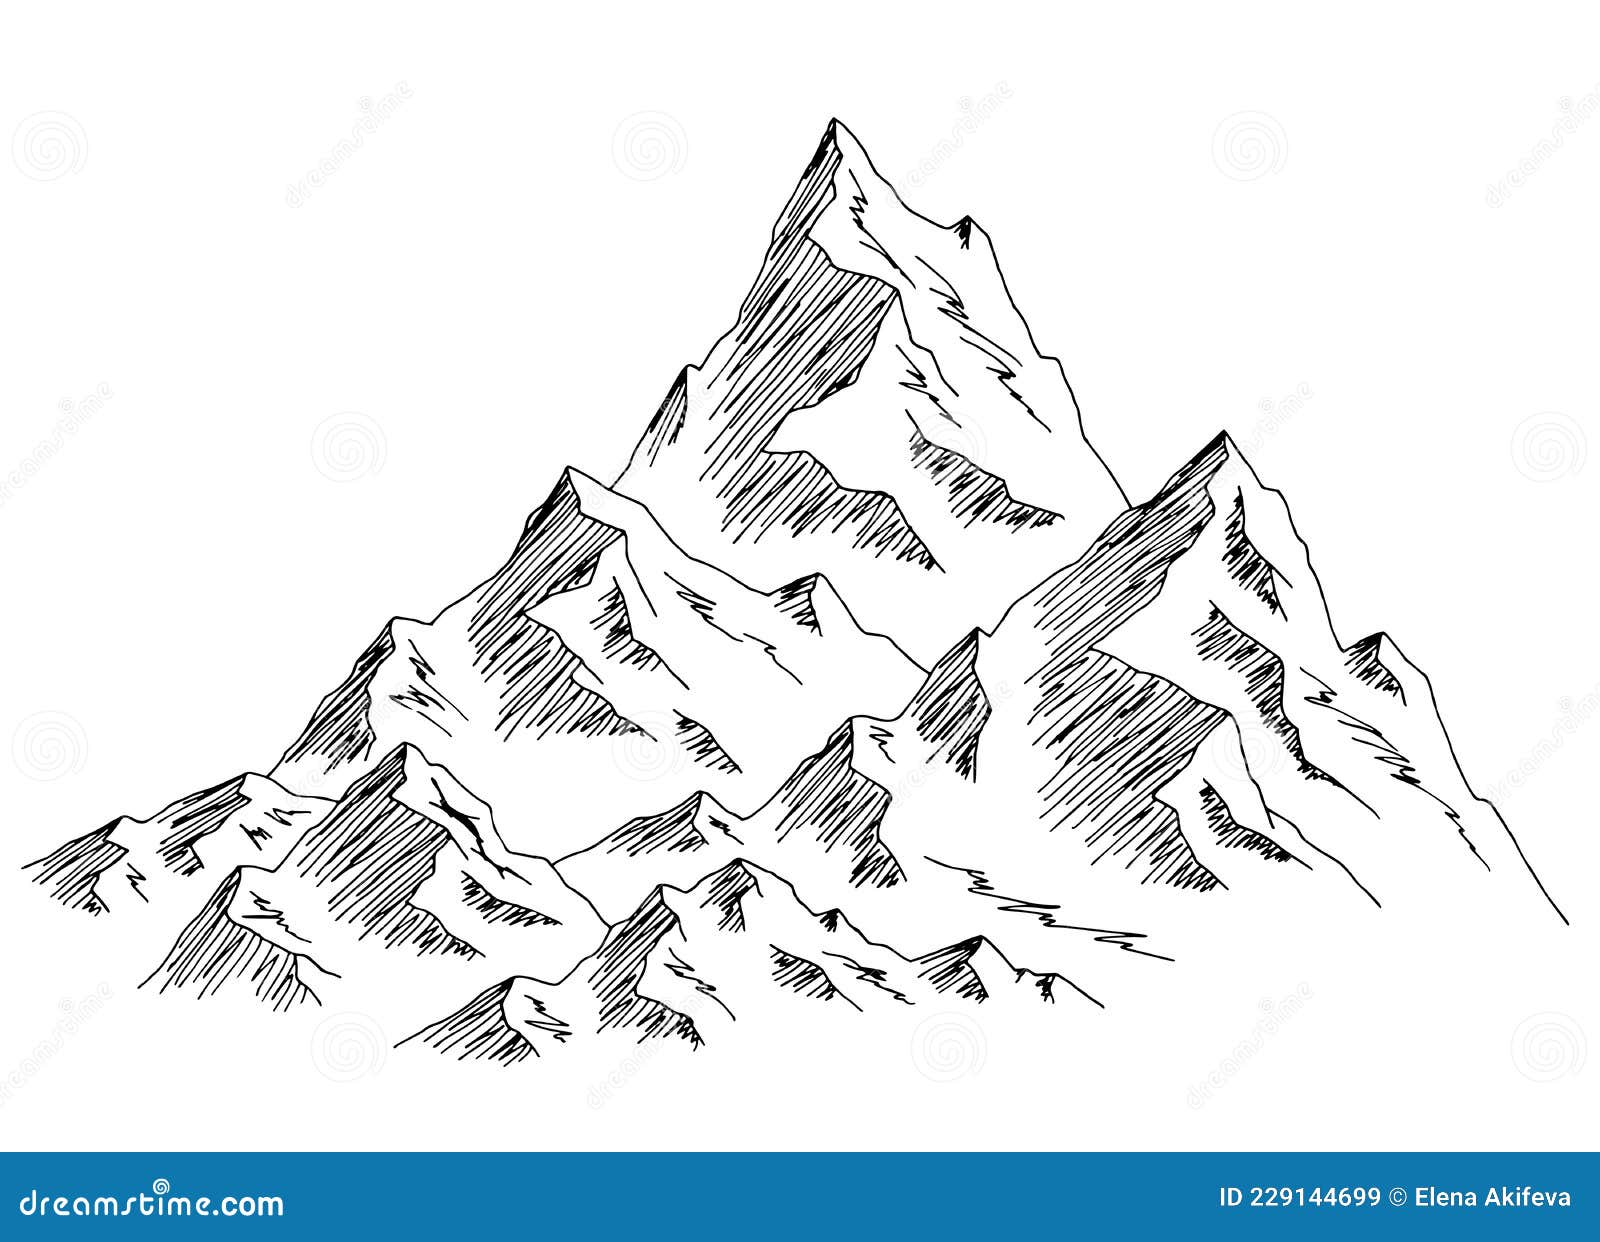 Mountain Top Graphic Black White Isolated Landscape Sketch Illustration ...